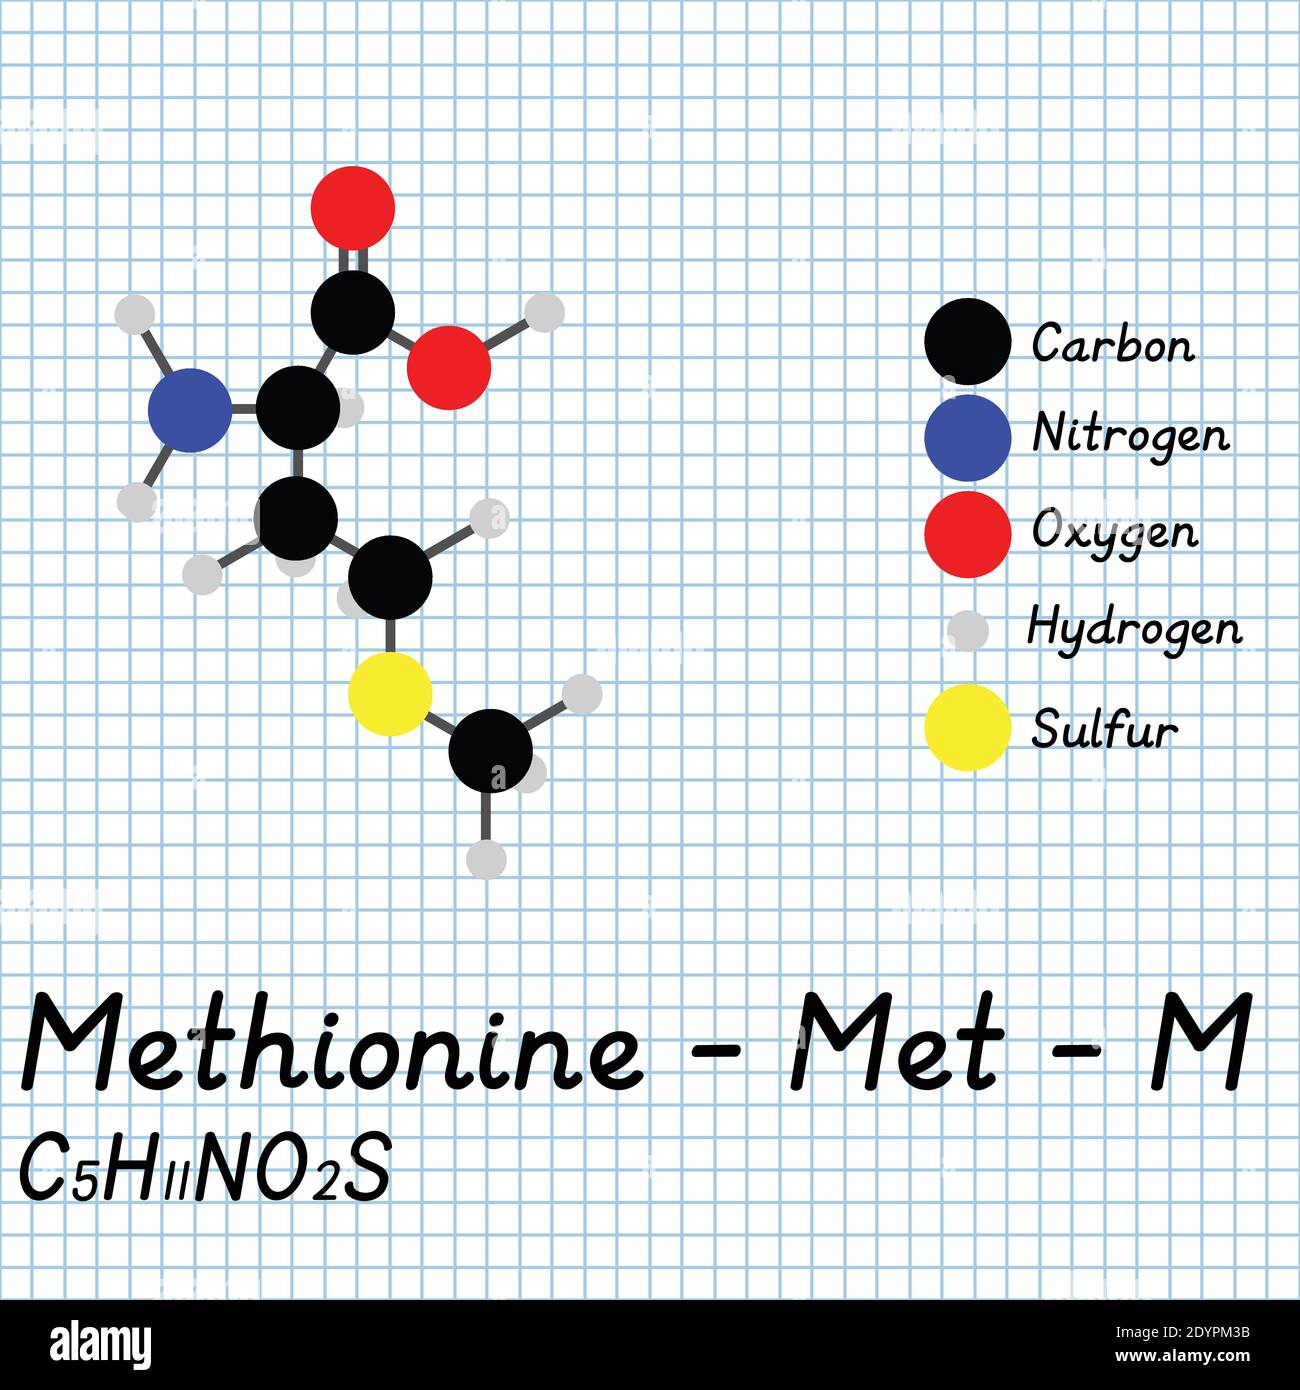 Methionine - Met - M Amino Acid molecular formula and chemical structure . 2D Ball and stick model on school paper sheet background. EPS10 Stock Vector